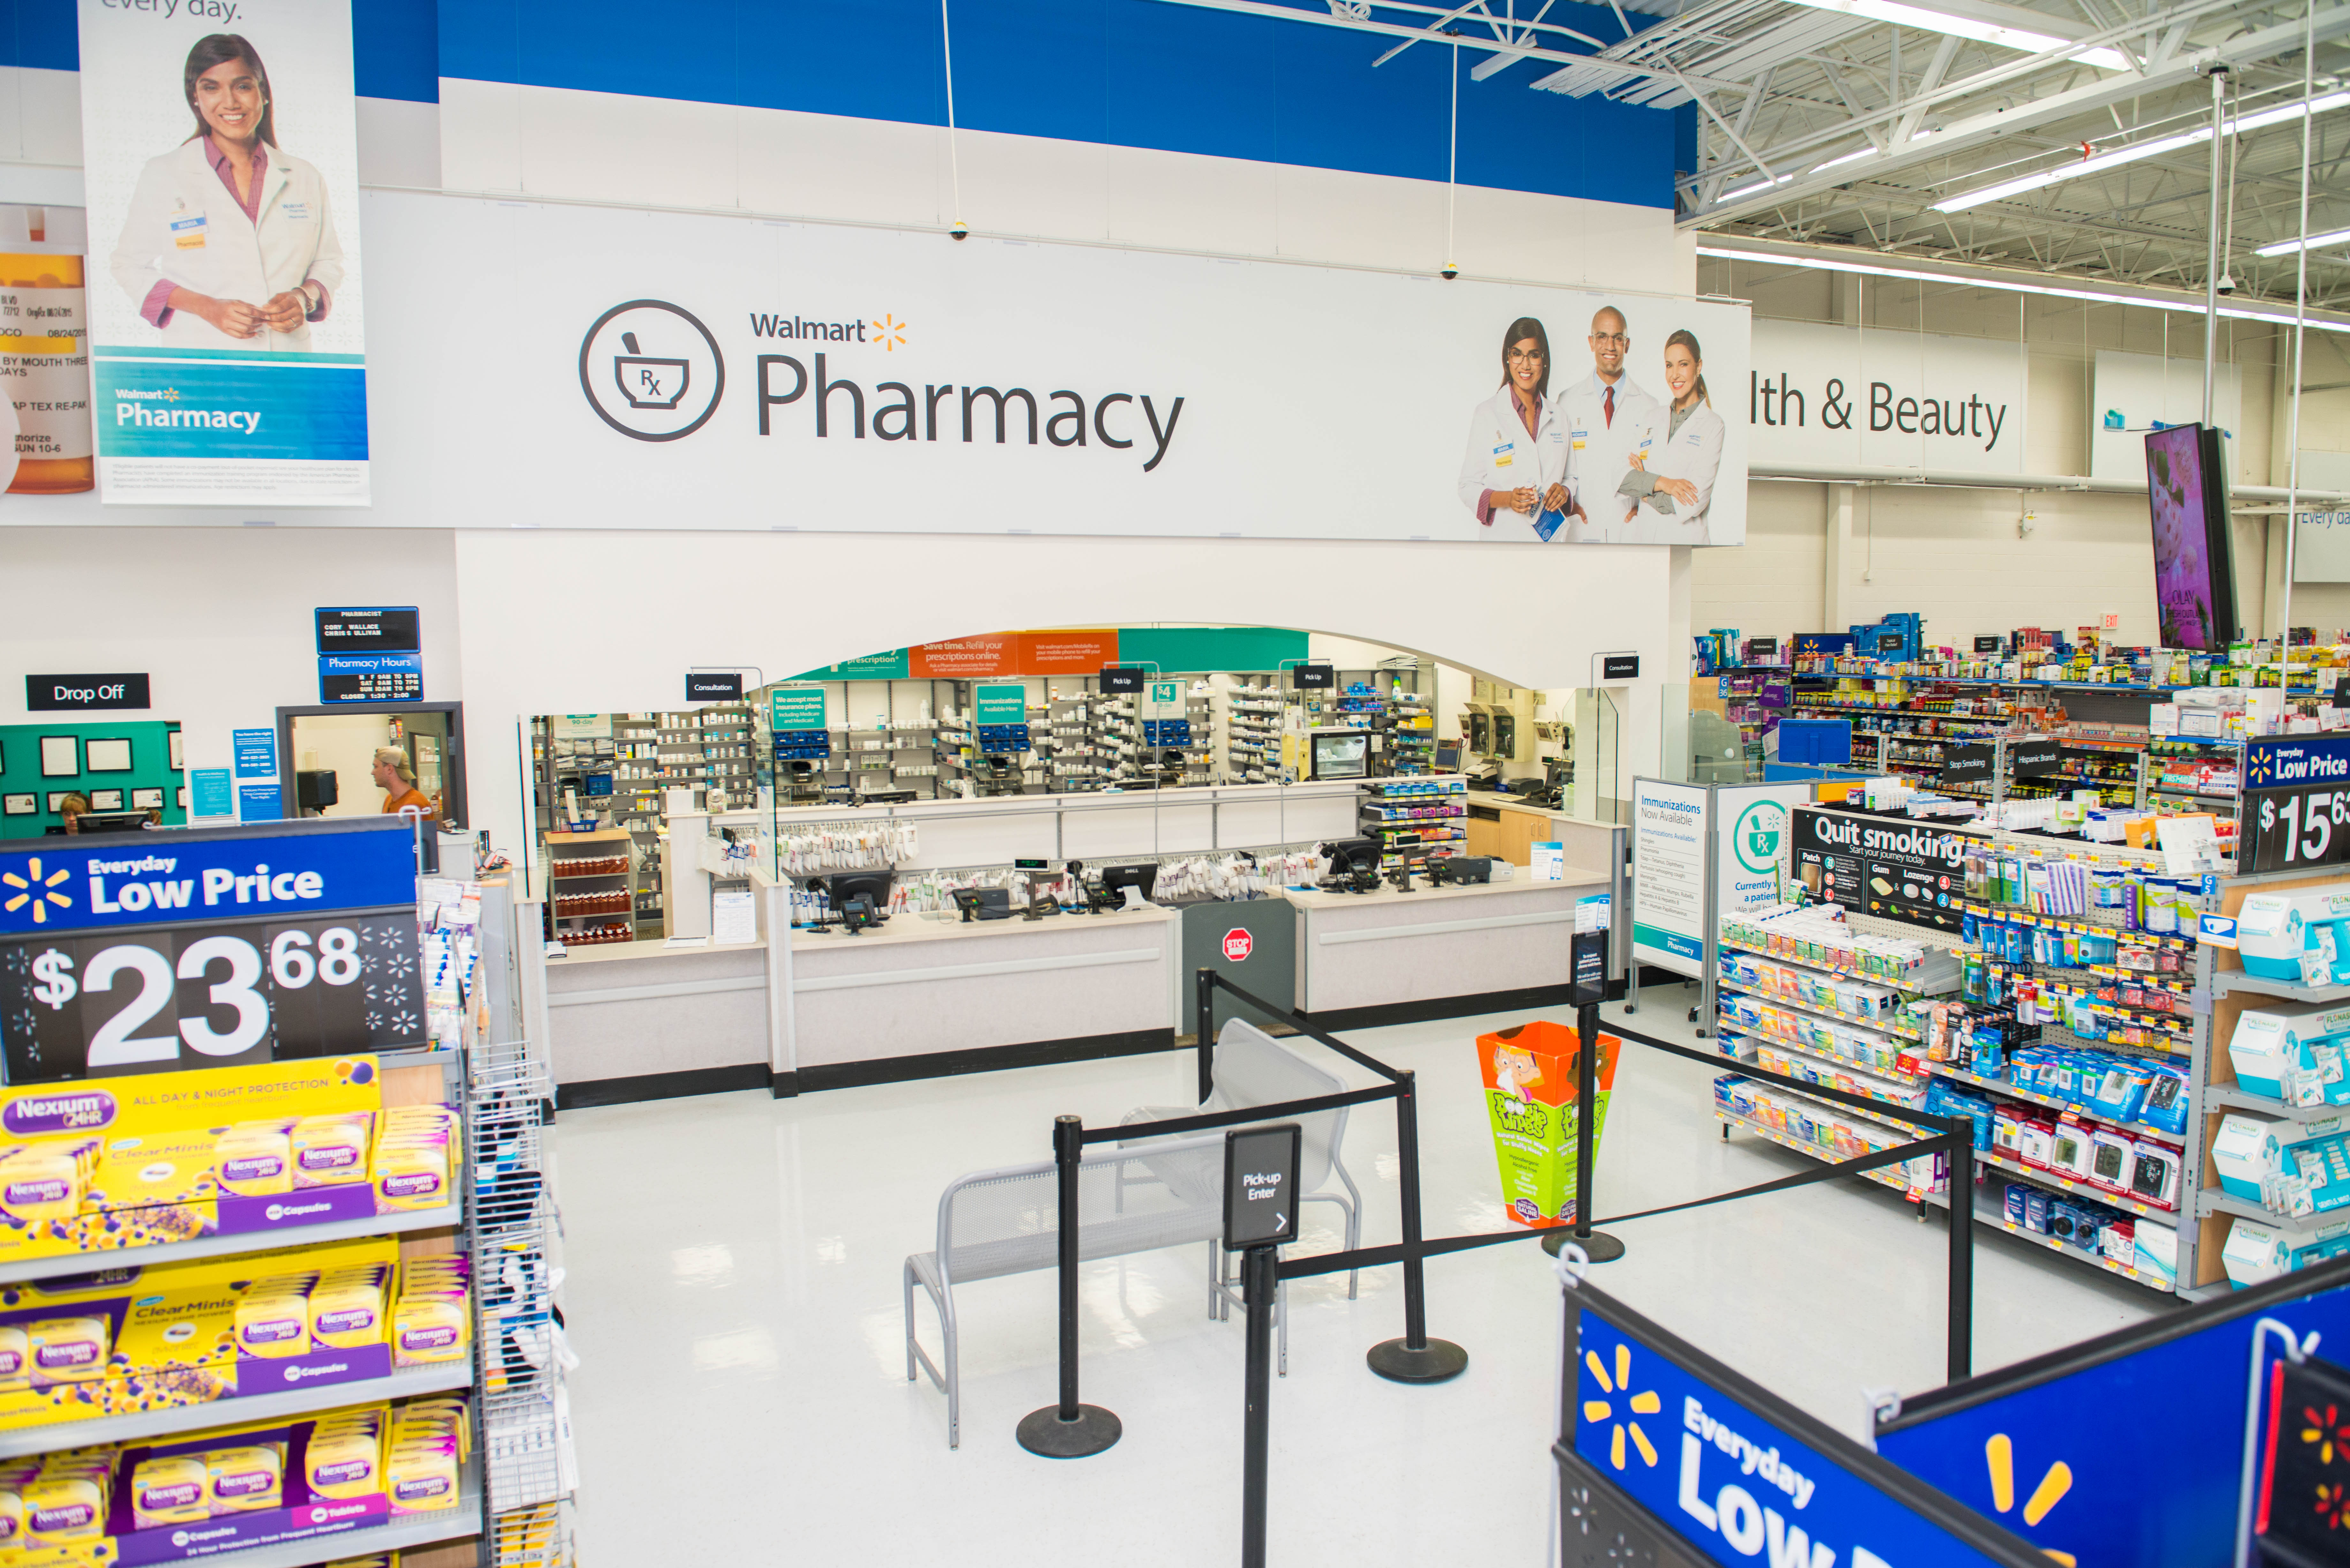 16066 State Hwy 121, Frisco, Texas, Walmart Pharmacy, Point of Care, immunizations, Kids, Low prices, mobile app, grand opening 